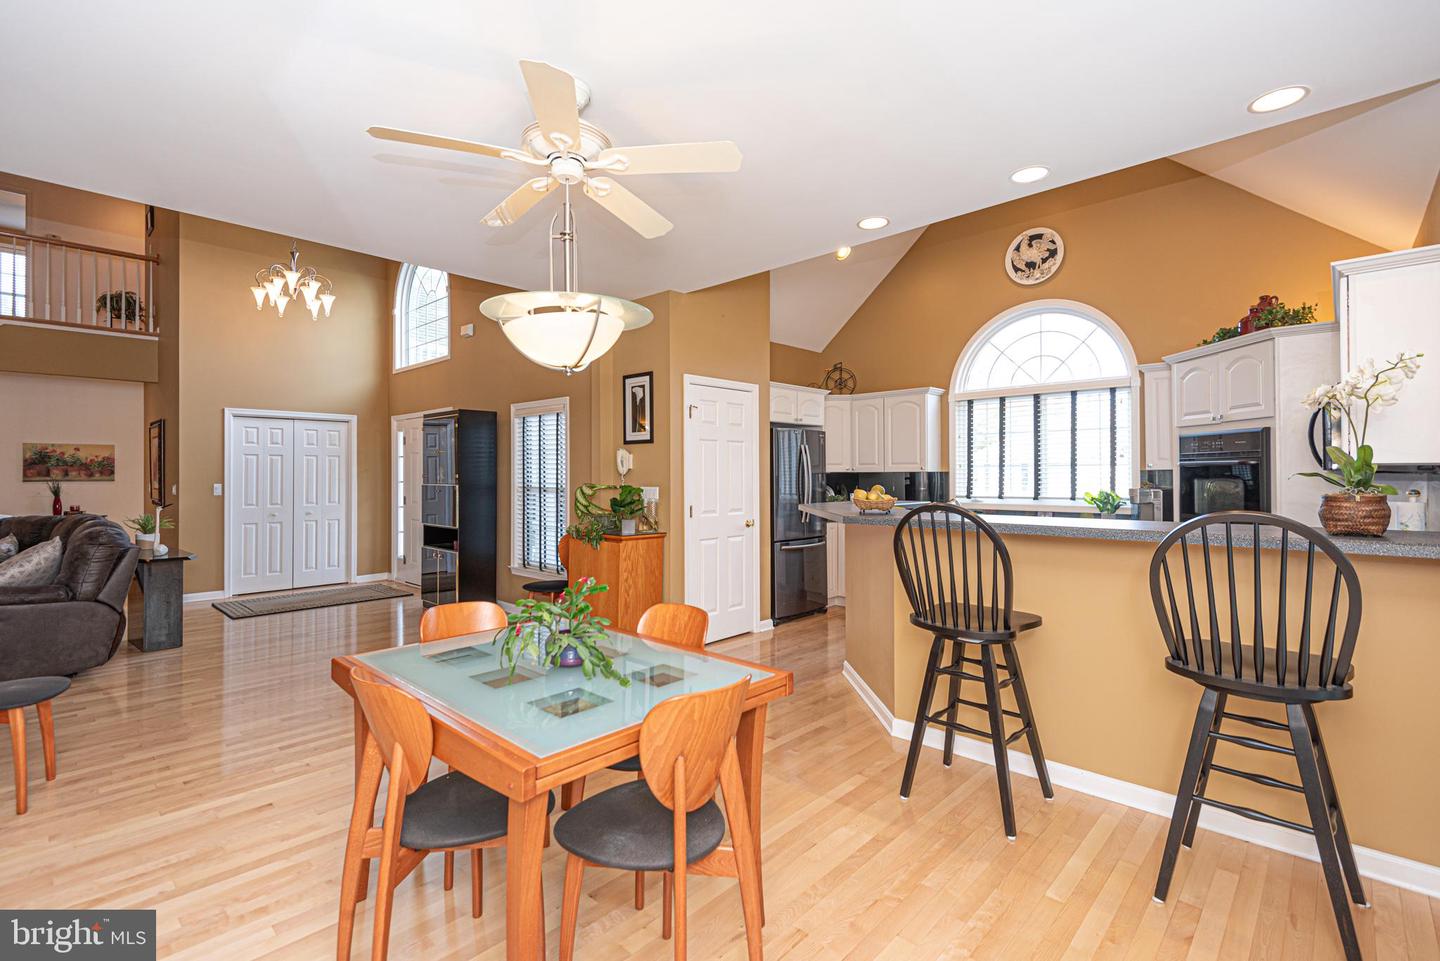 MDWO2019426-802903995200-2024-03-08-00-14-50 106 Pine Forest Dr | Berlin, MD Real Estate For Sale | MLS# Mdwo2019426  - 1st Choice Properties